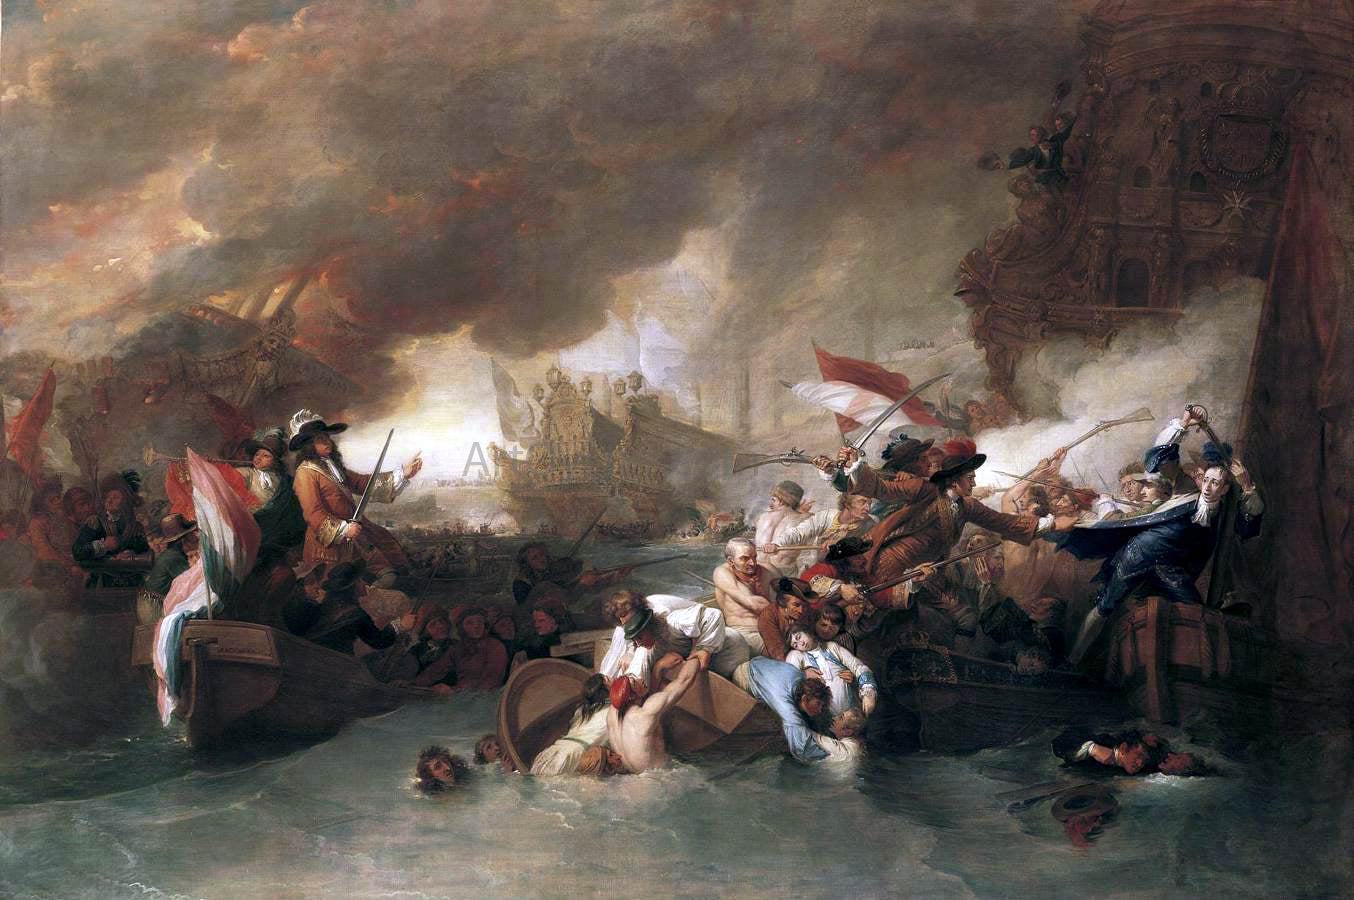  Benjamin West The Battle of La Hogue - Hand Painted Oil Painting